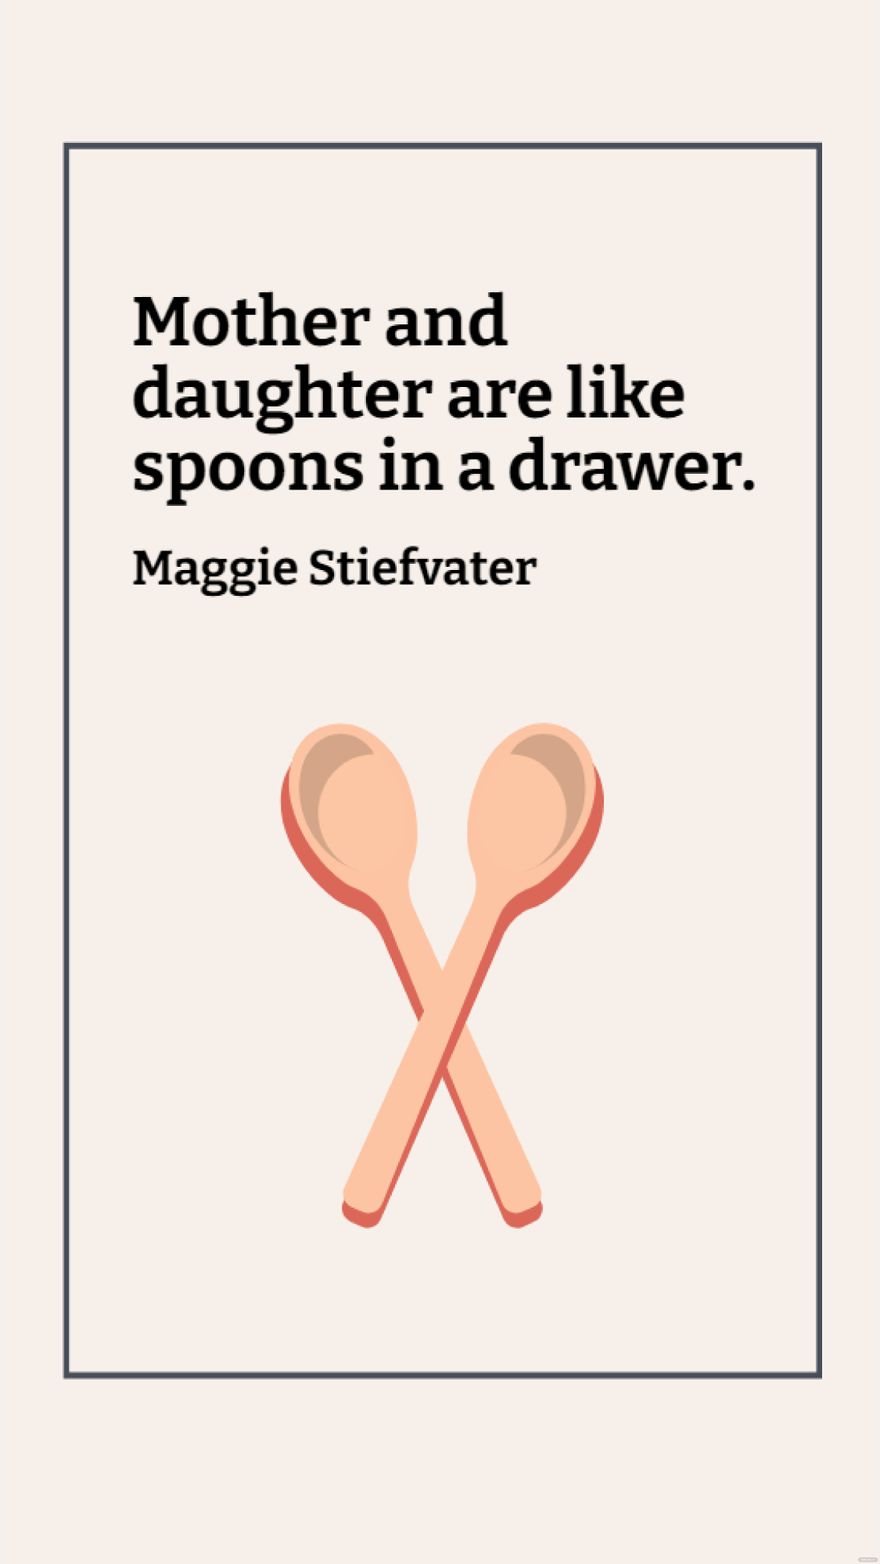 Maggie Stiefvater - Mother and daughter are like spoons in a drawer. in JPG